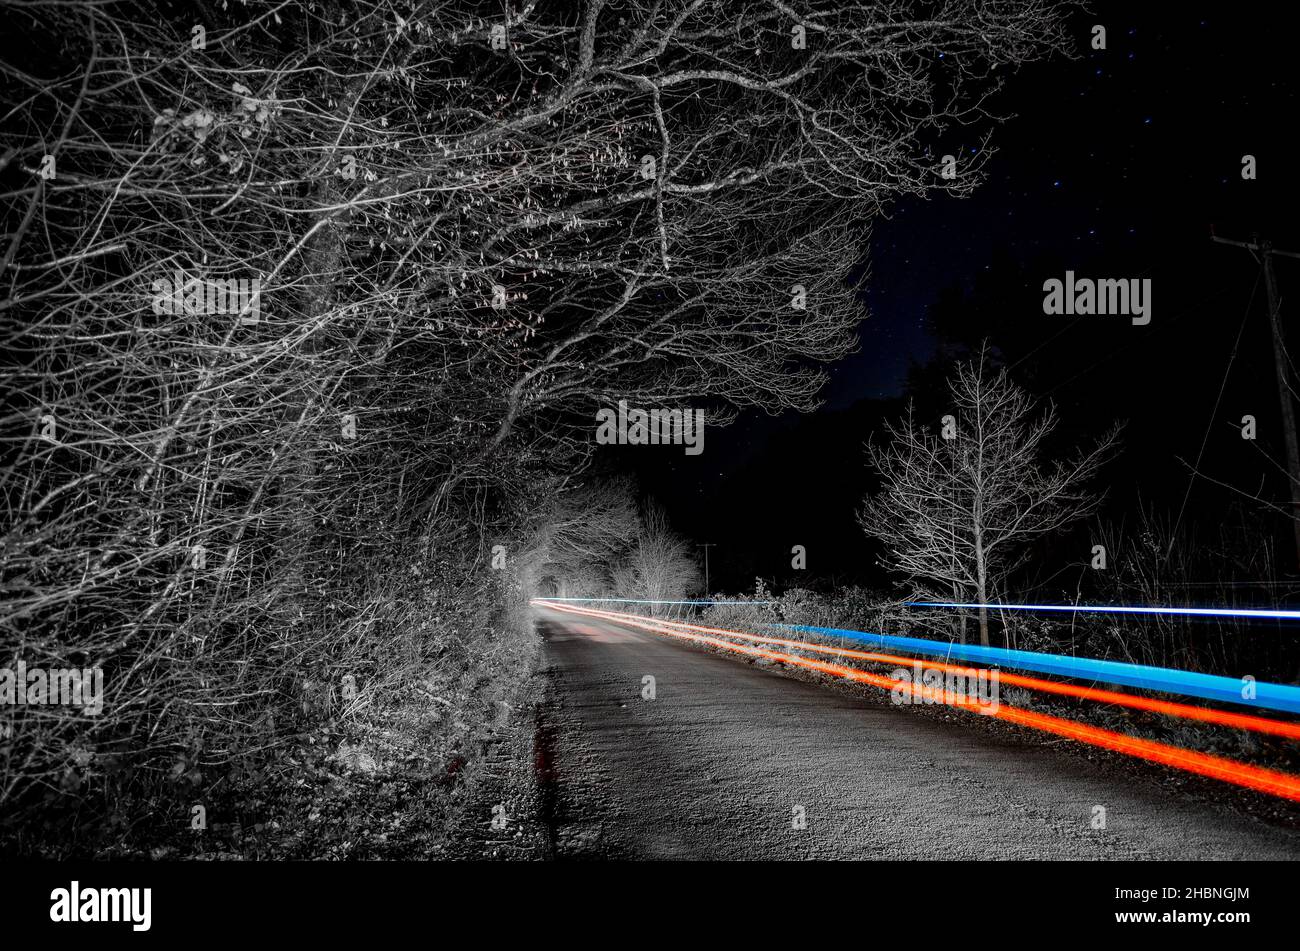 A rally car passing photographed at night in Hampshire, UK Stock Photo